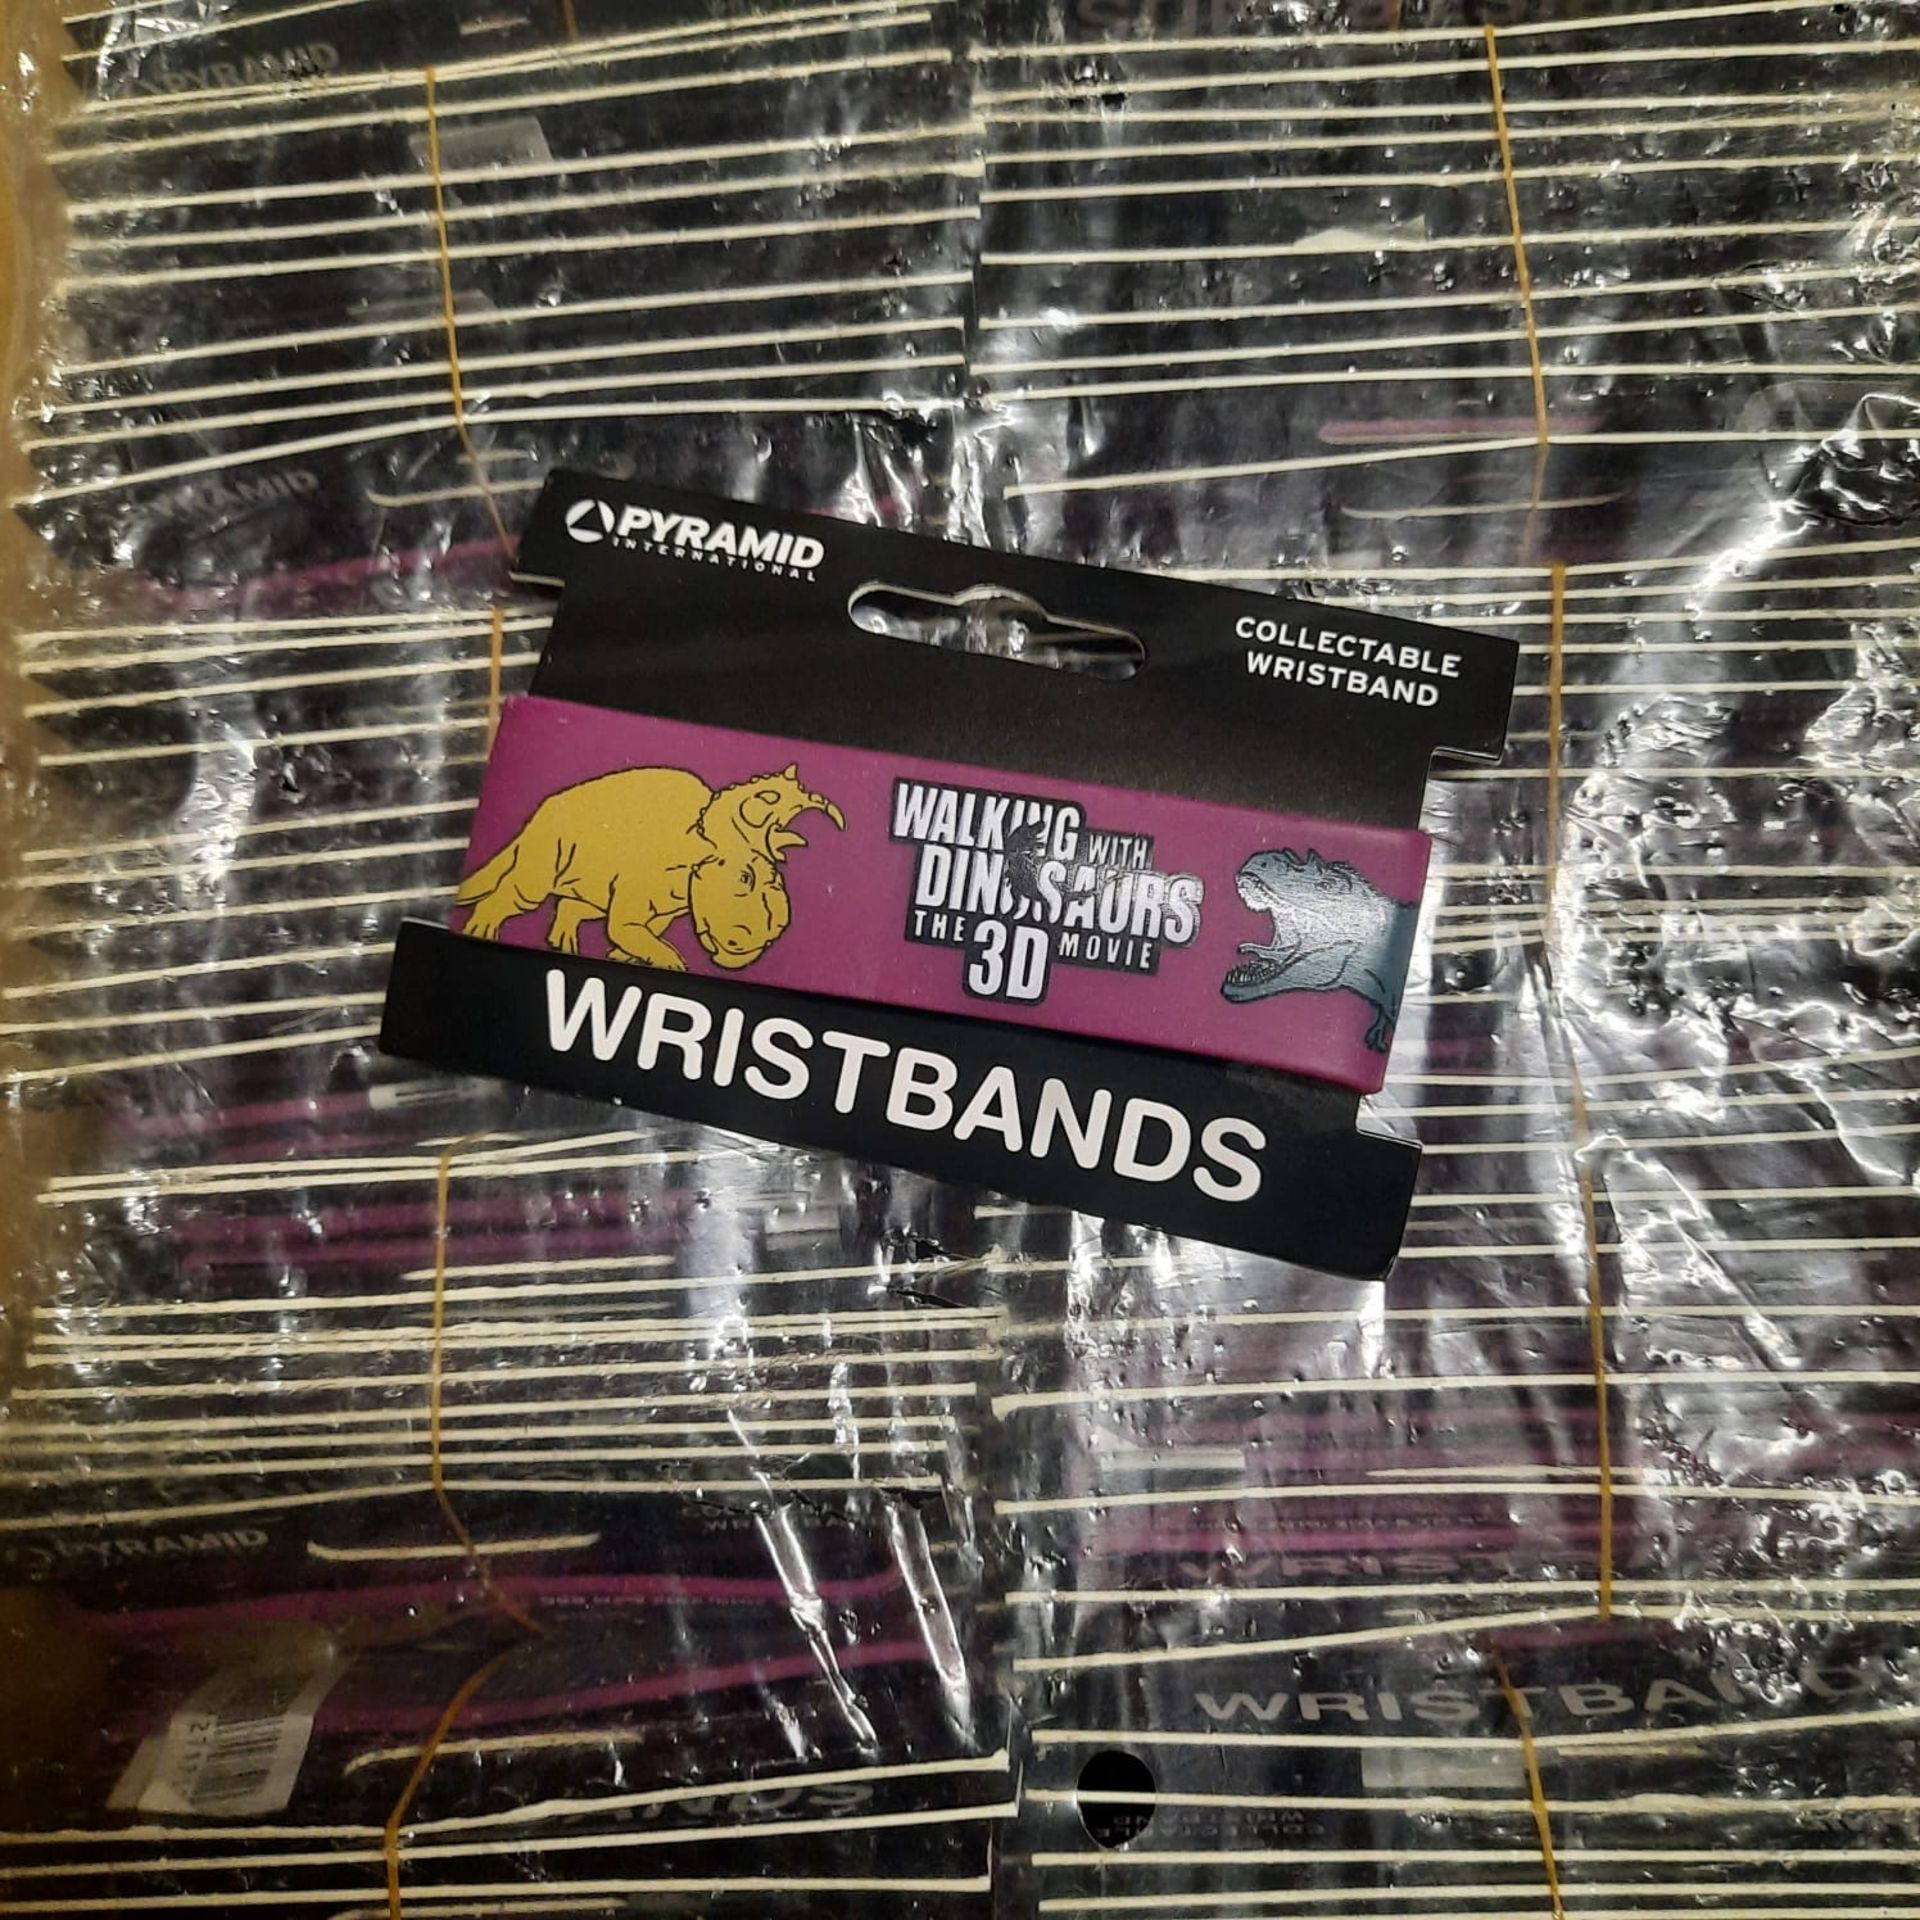 X 600 BRAND NEW & BOXED WALKING WITH DINOSAURS 3D WRISTBANDS - SALEROOM AT THE BOTTOM OF ROW (C).